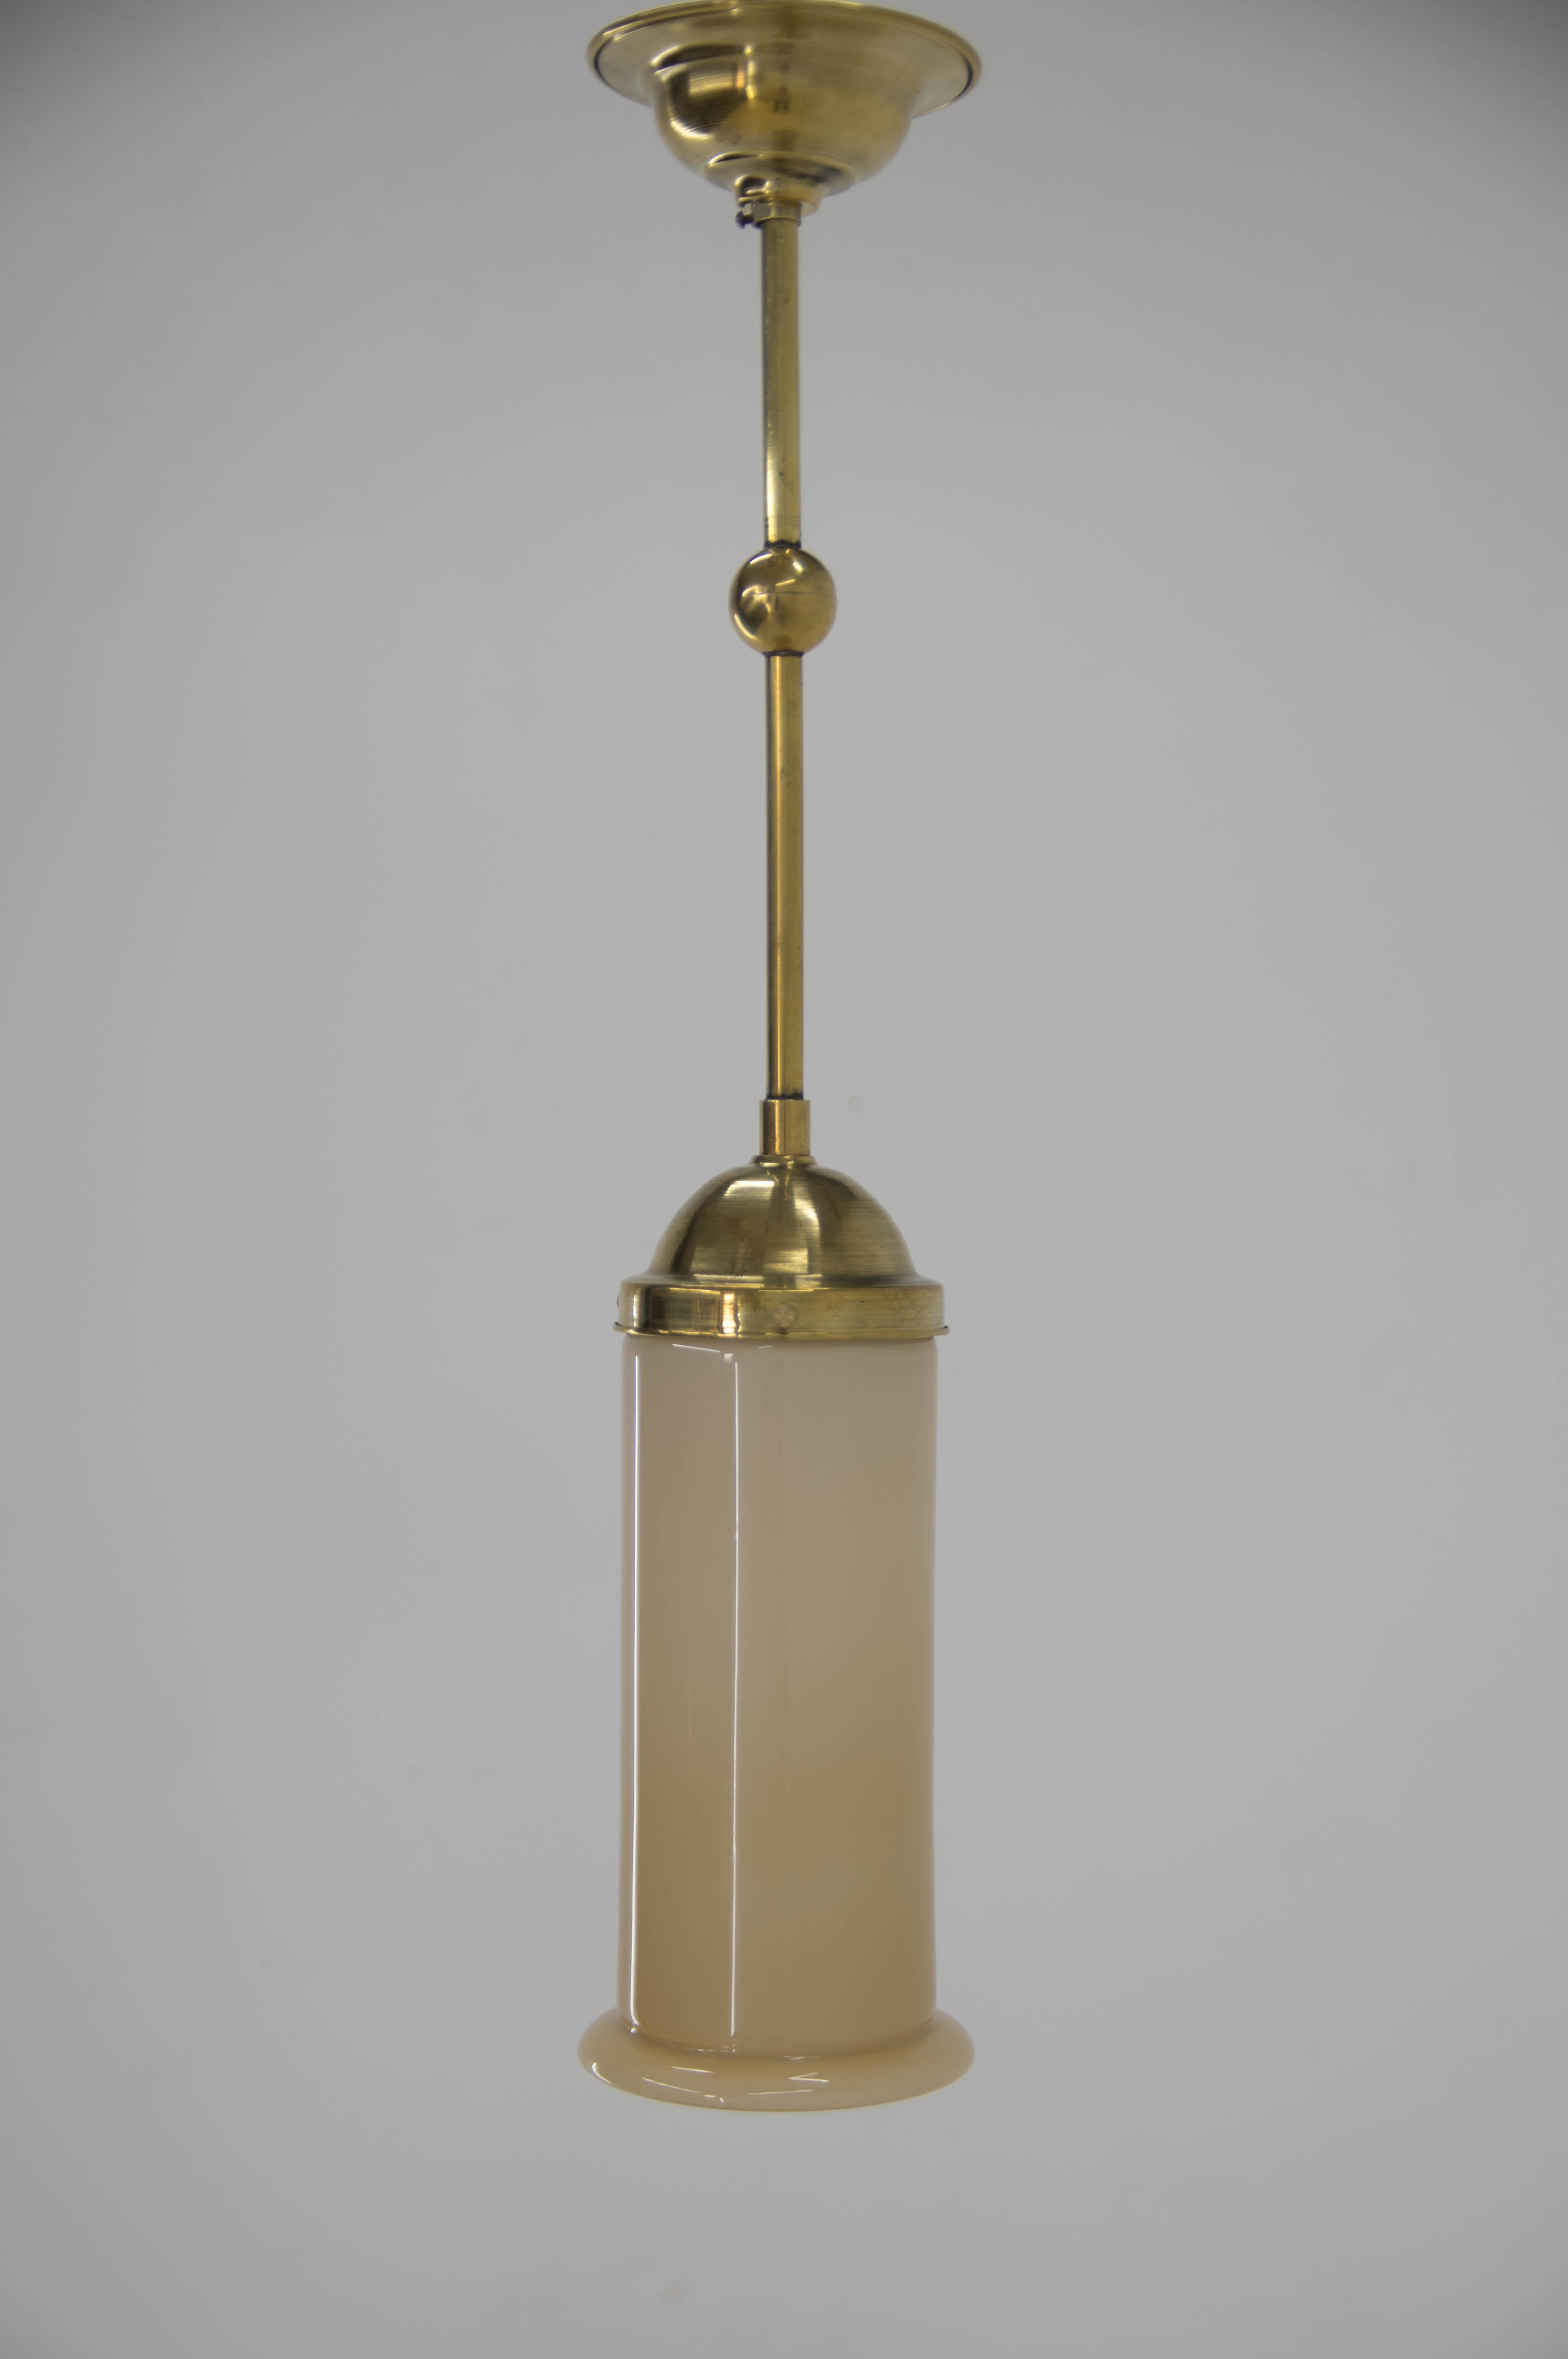 Beautiful Art Deco pendant from 1930s.
Brass central rod and beige blown glass shade.
Rewired: 1x40W, E25-E27 bulb.
US wiring compatible.